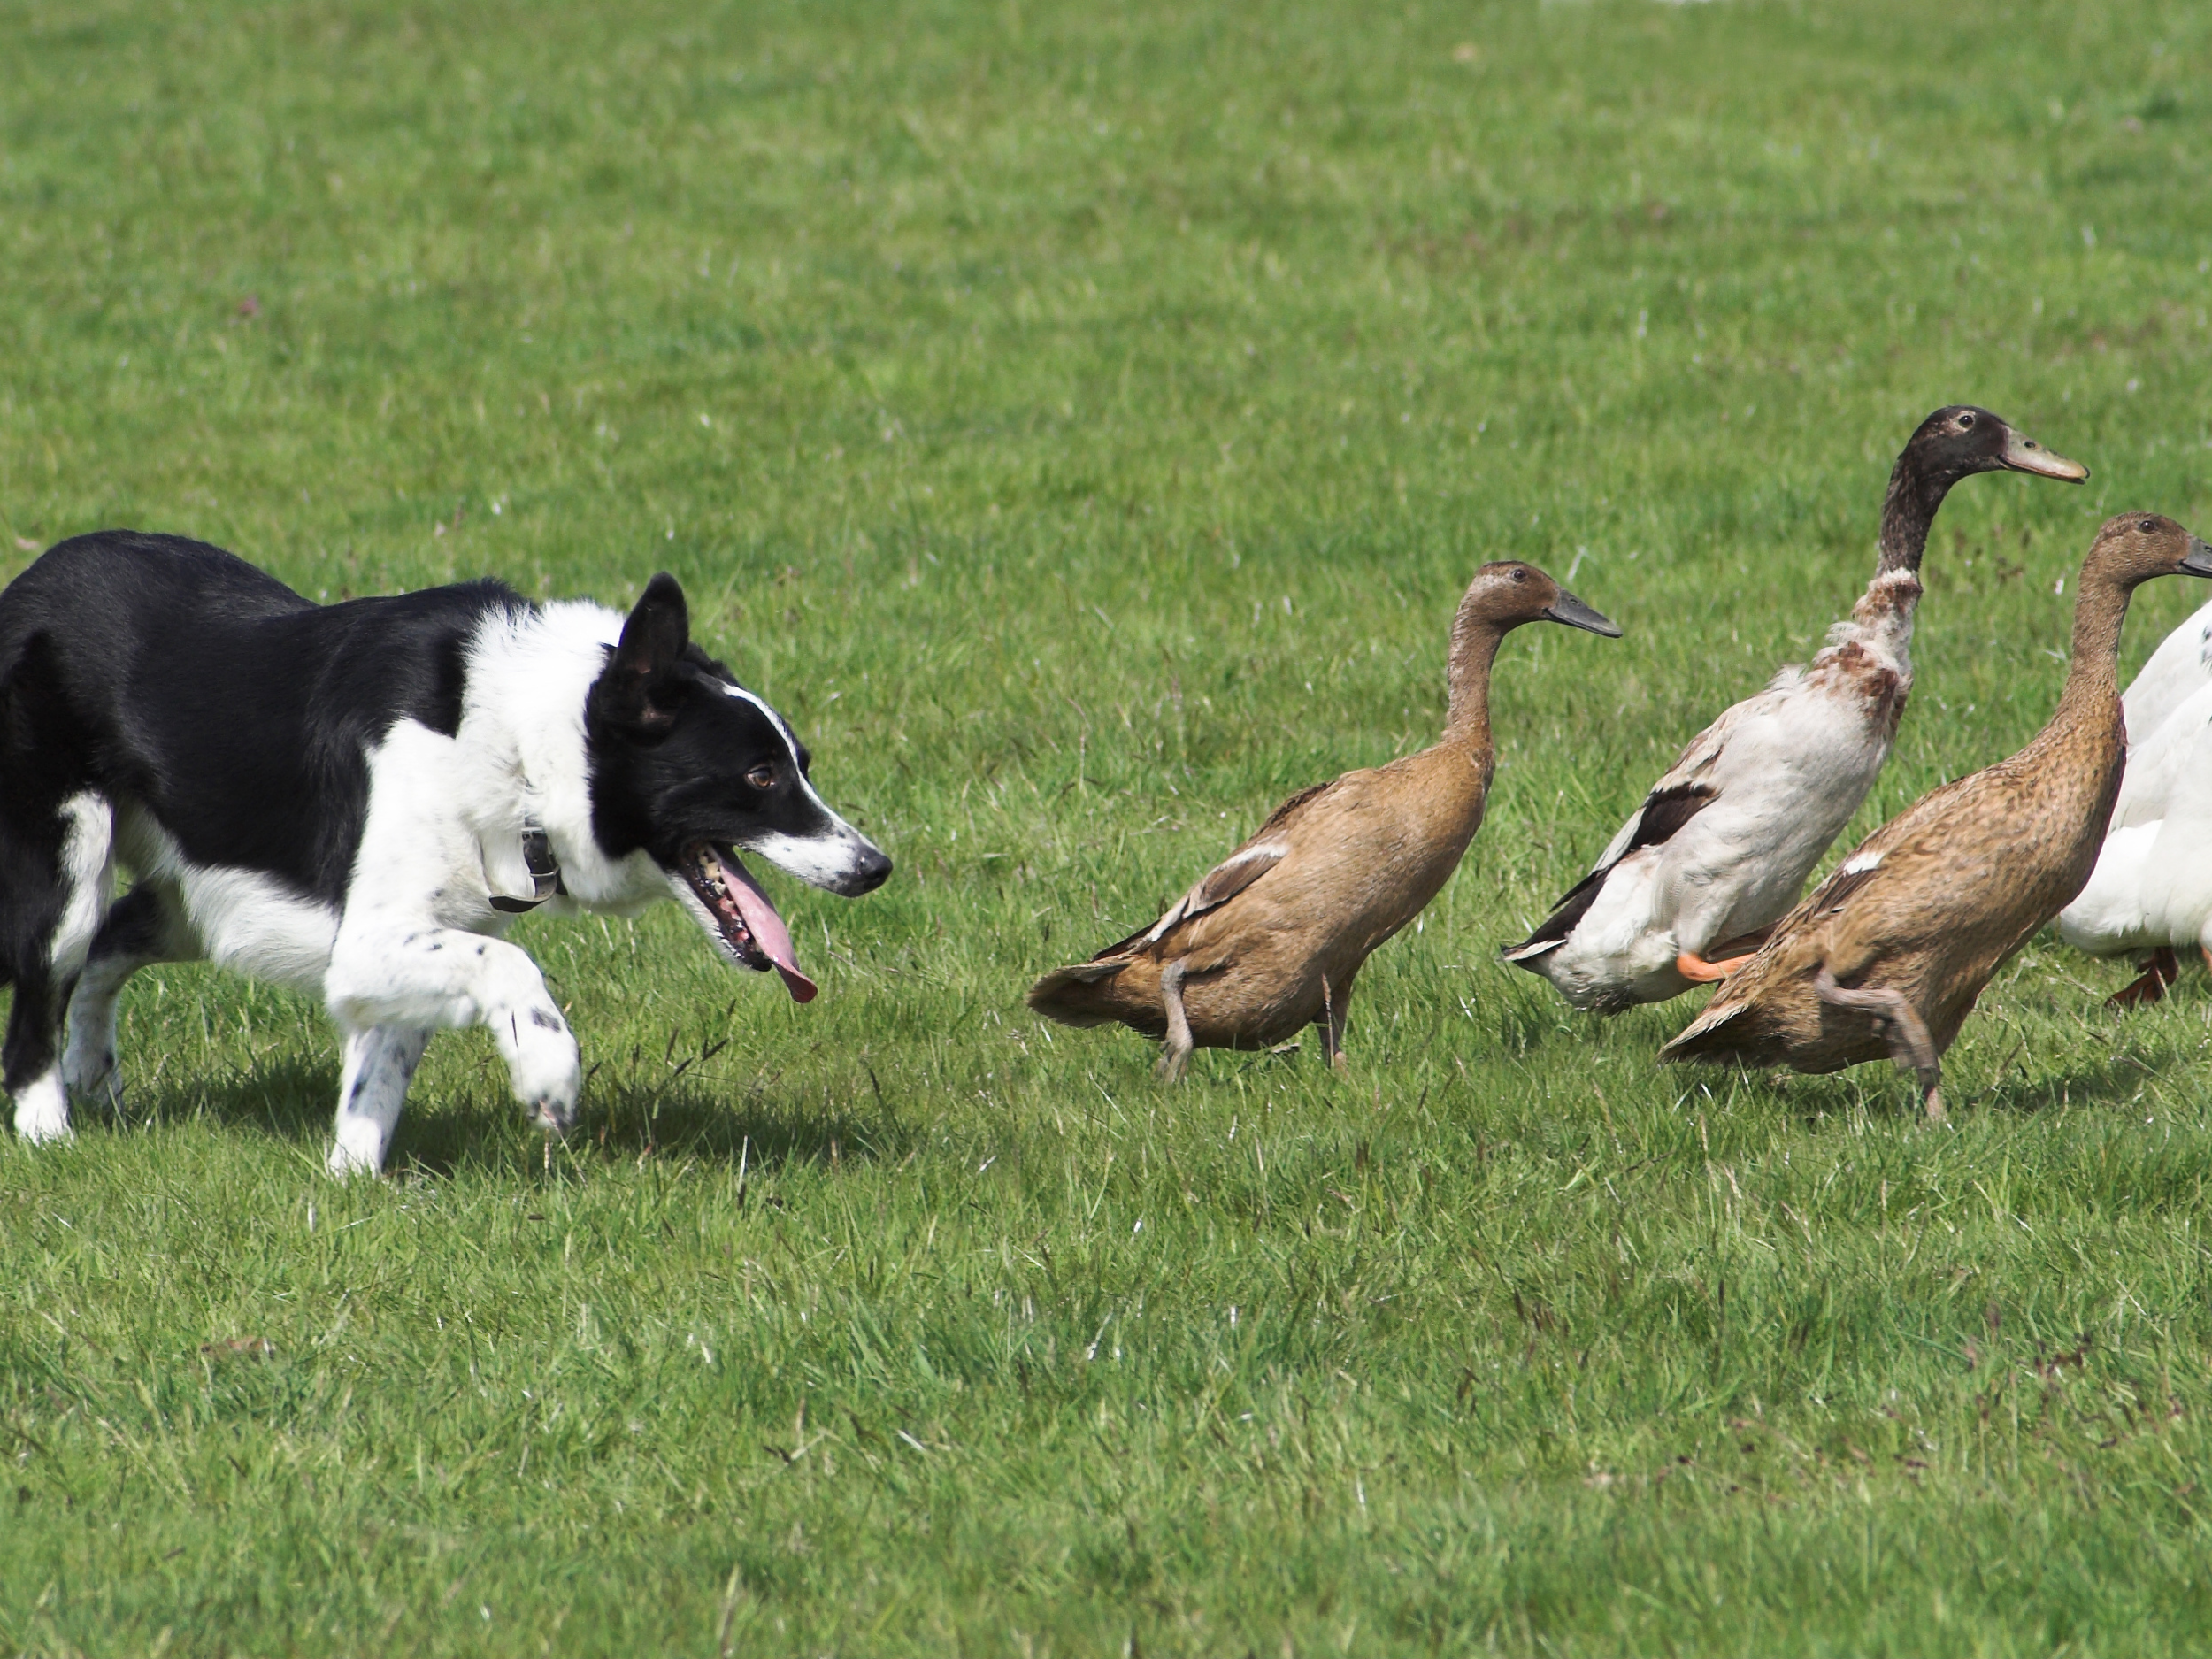 Photo: A Border Collie herds some geese in a field.